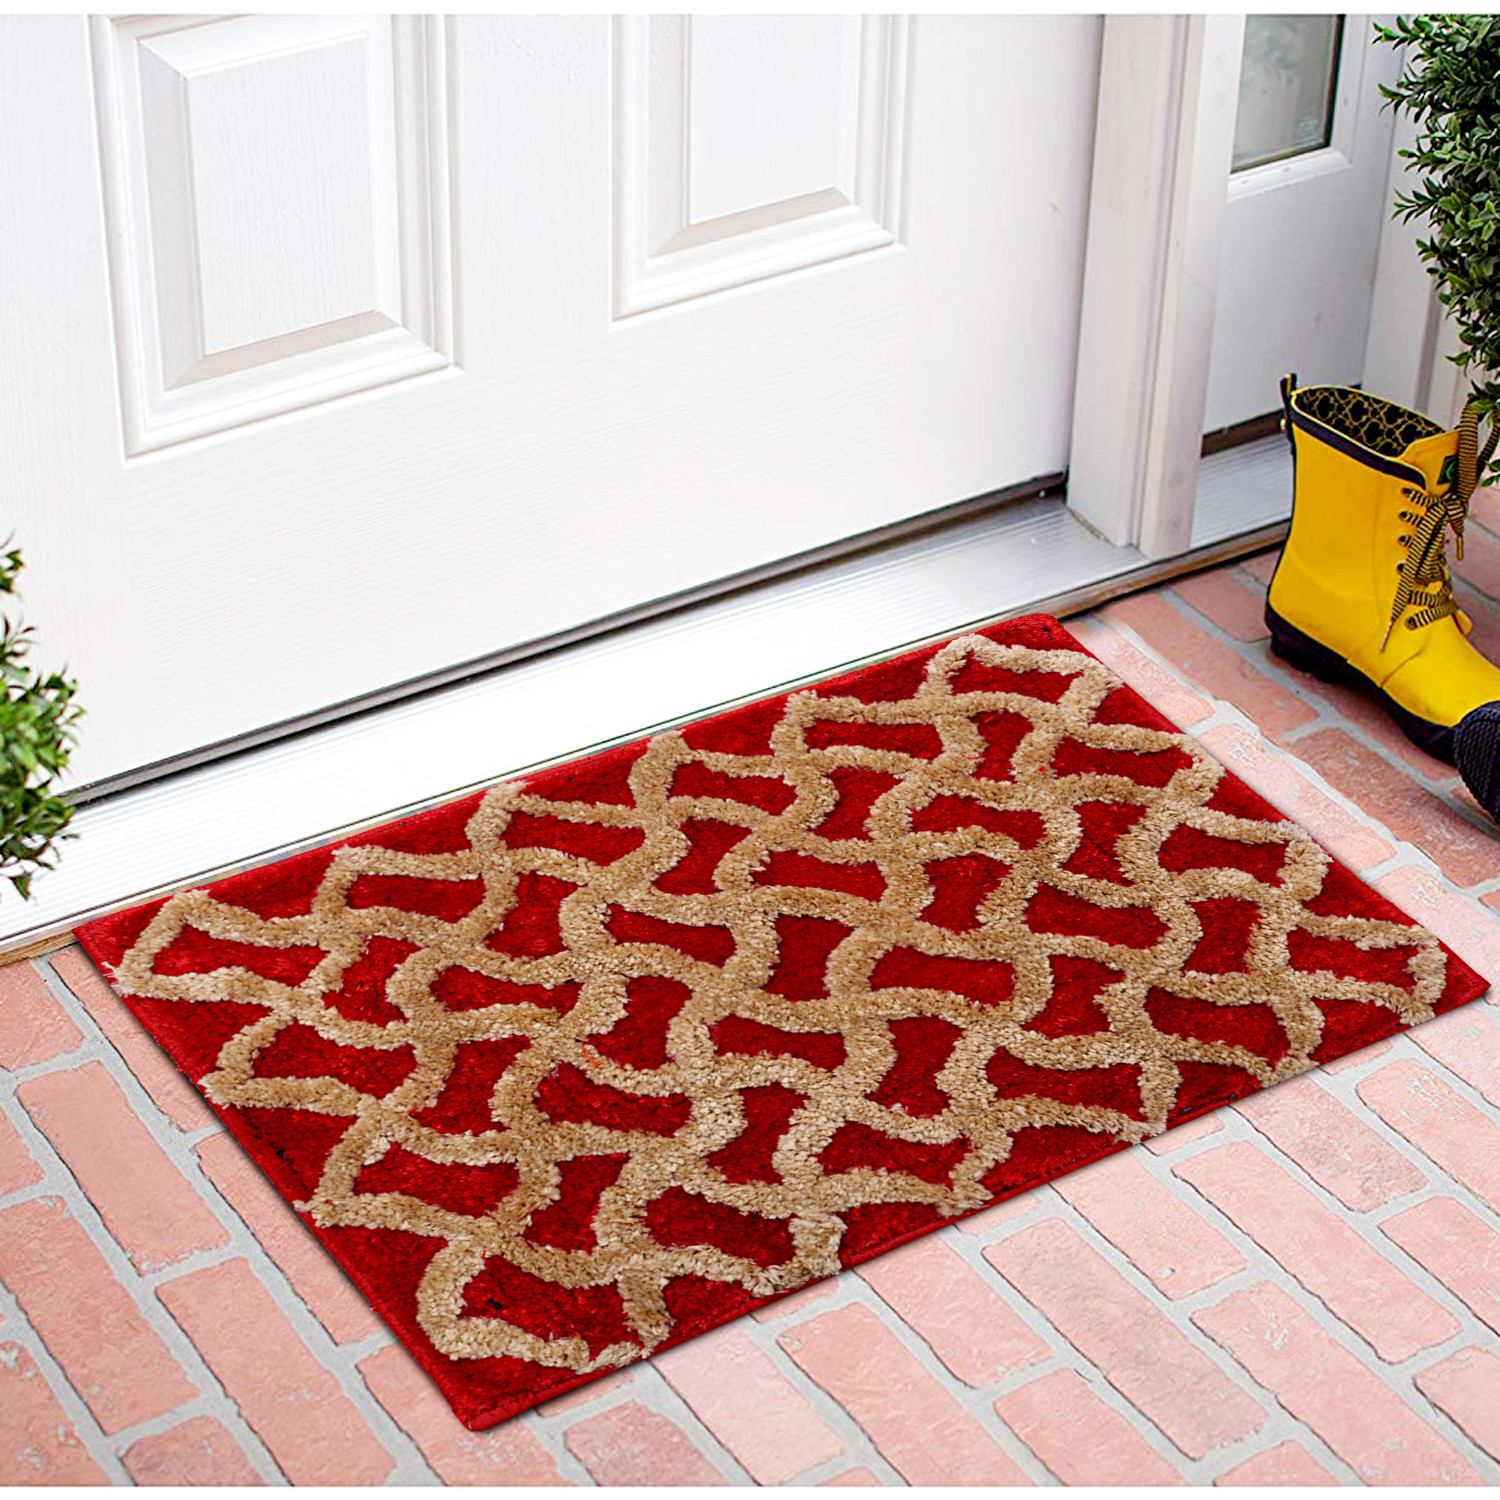 Kuber Industries Soft, lightweigth, Washable, Non Slip Doormat Entrance Rug Dirt Trapper Mat Shoes Scraper for Entry, Patio, Porch- Pack of 2 (Maroon & Red)